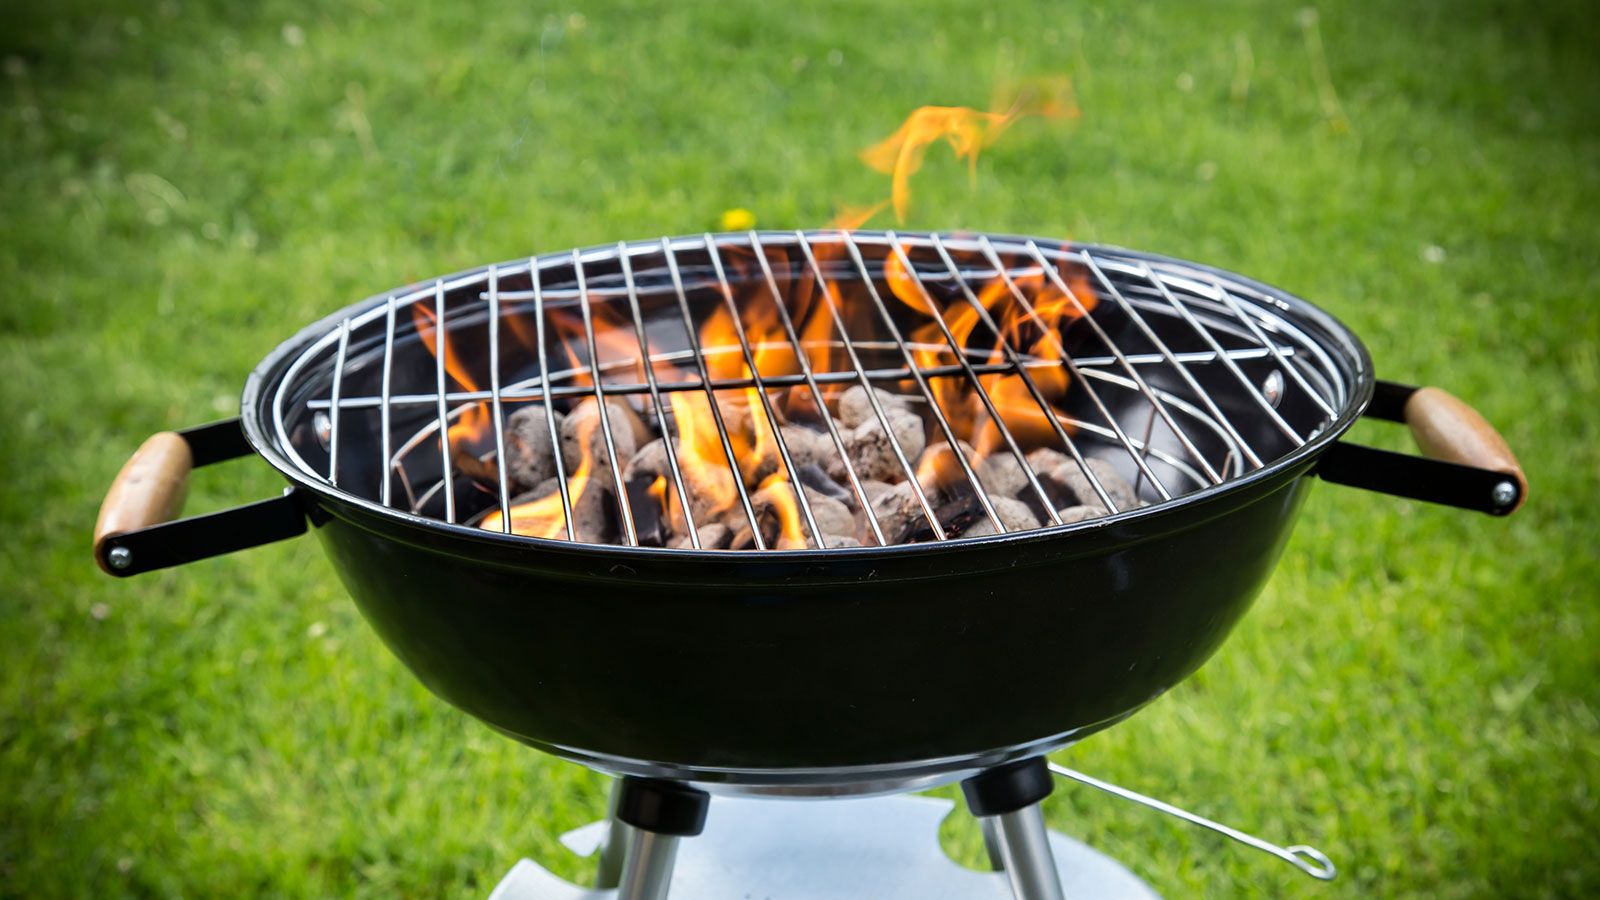 Electric Grill Is Estimated To Witness High Growth Owing To Opportunity In Outdoor Cooking